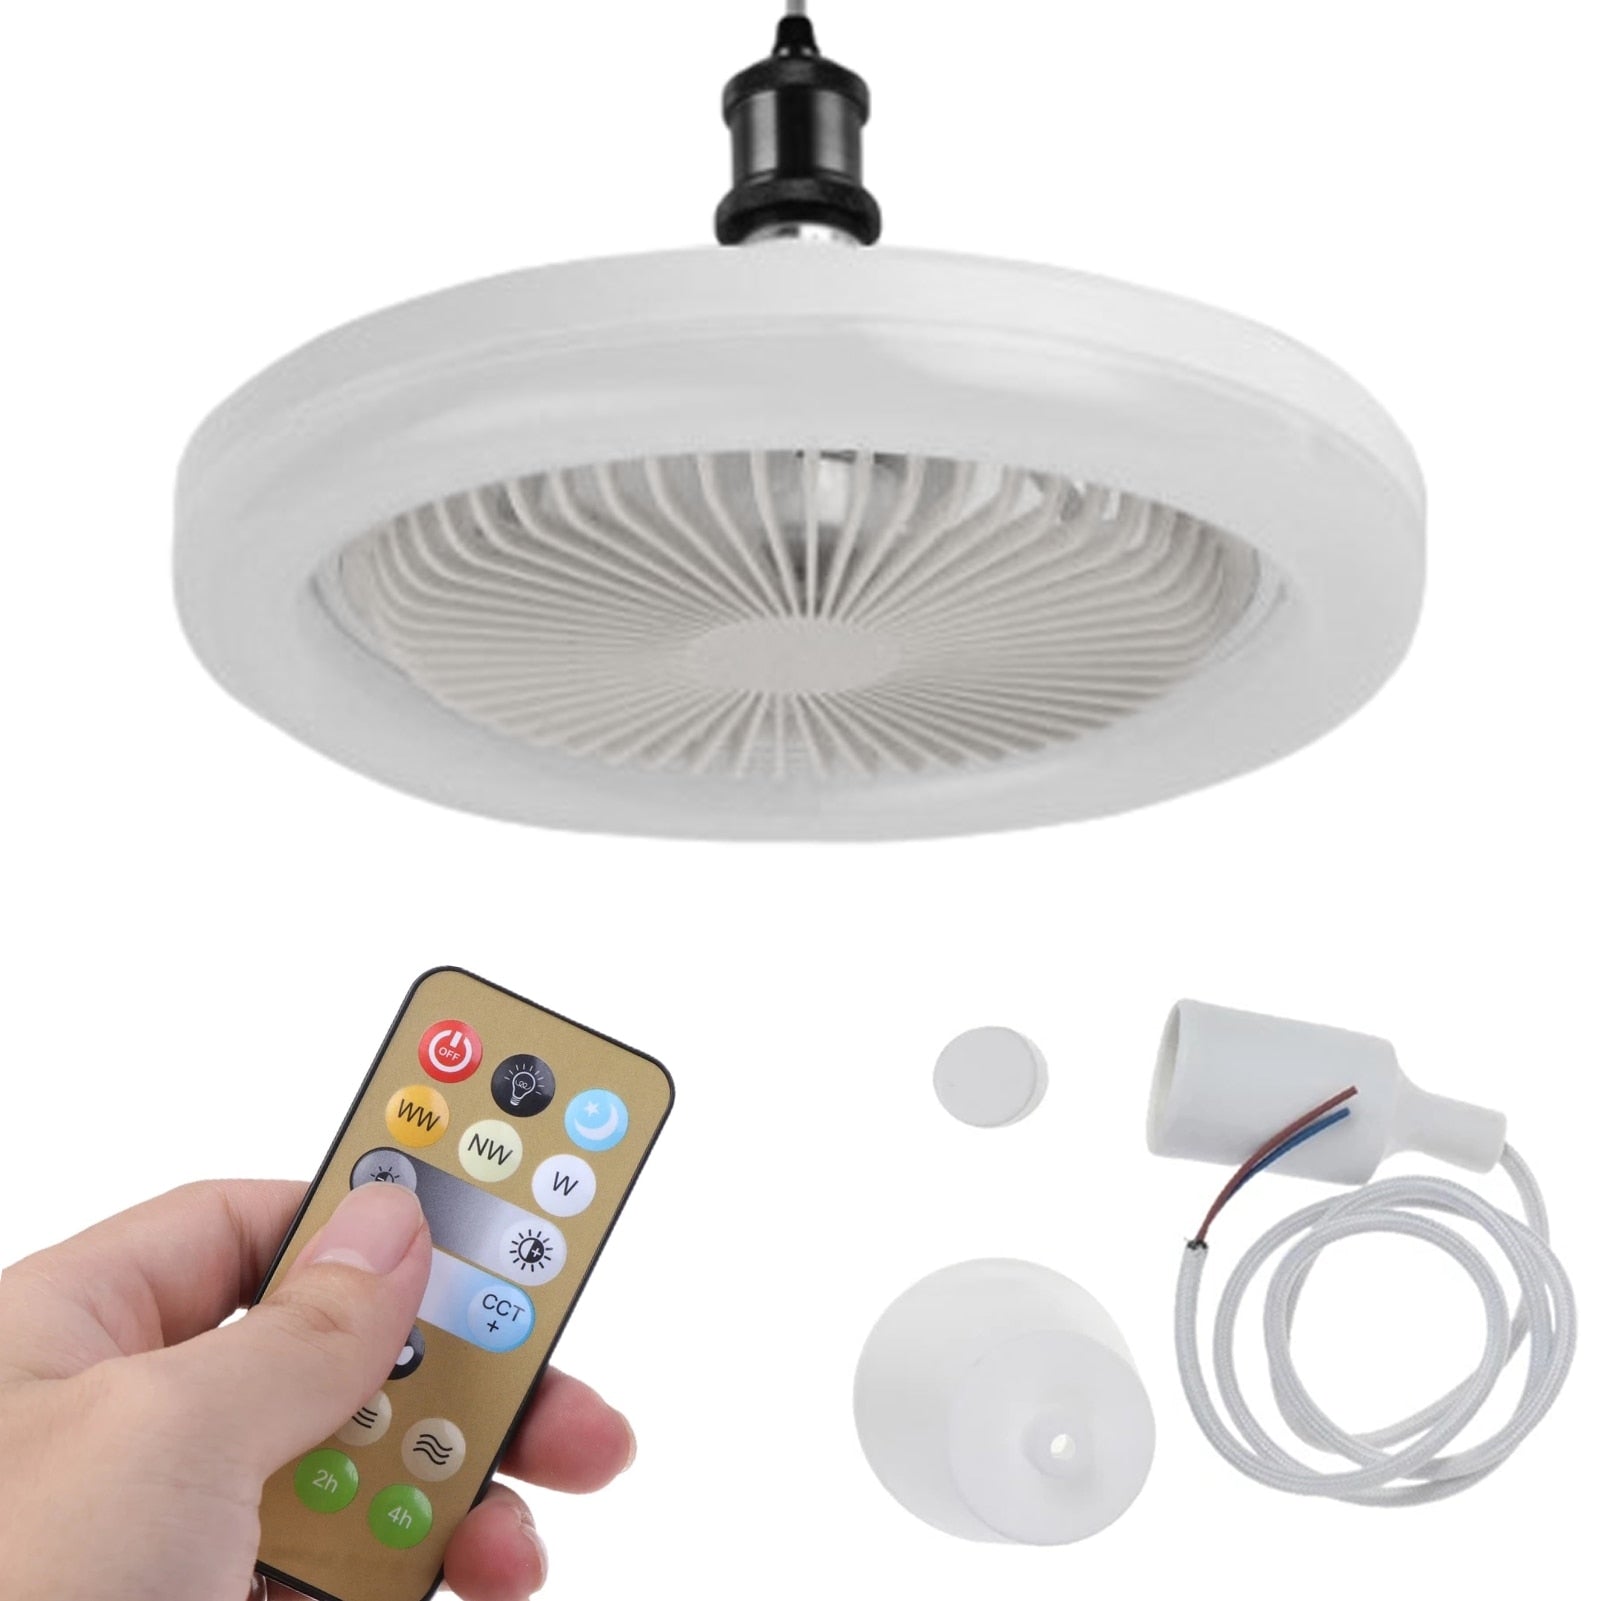 30W Ceiling Fan With Integrated Lights Remote Control Ceiling Lighting Bedroom Living Room Switch Control Home Decorative Lamps